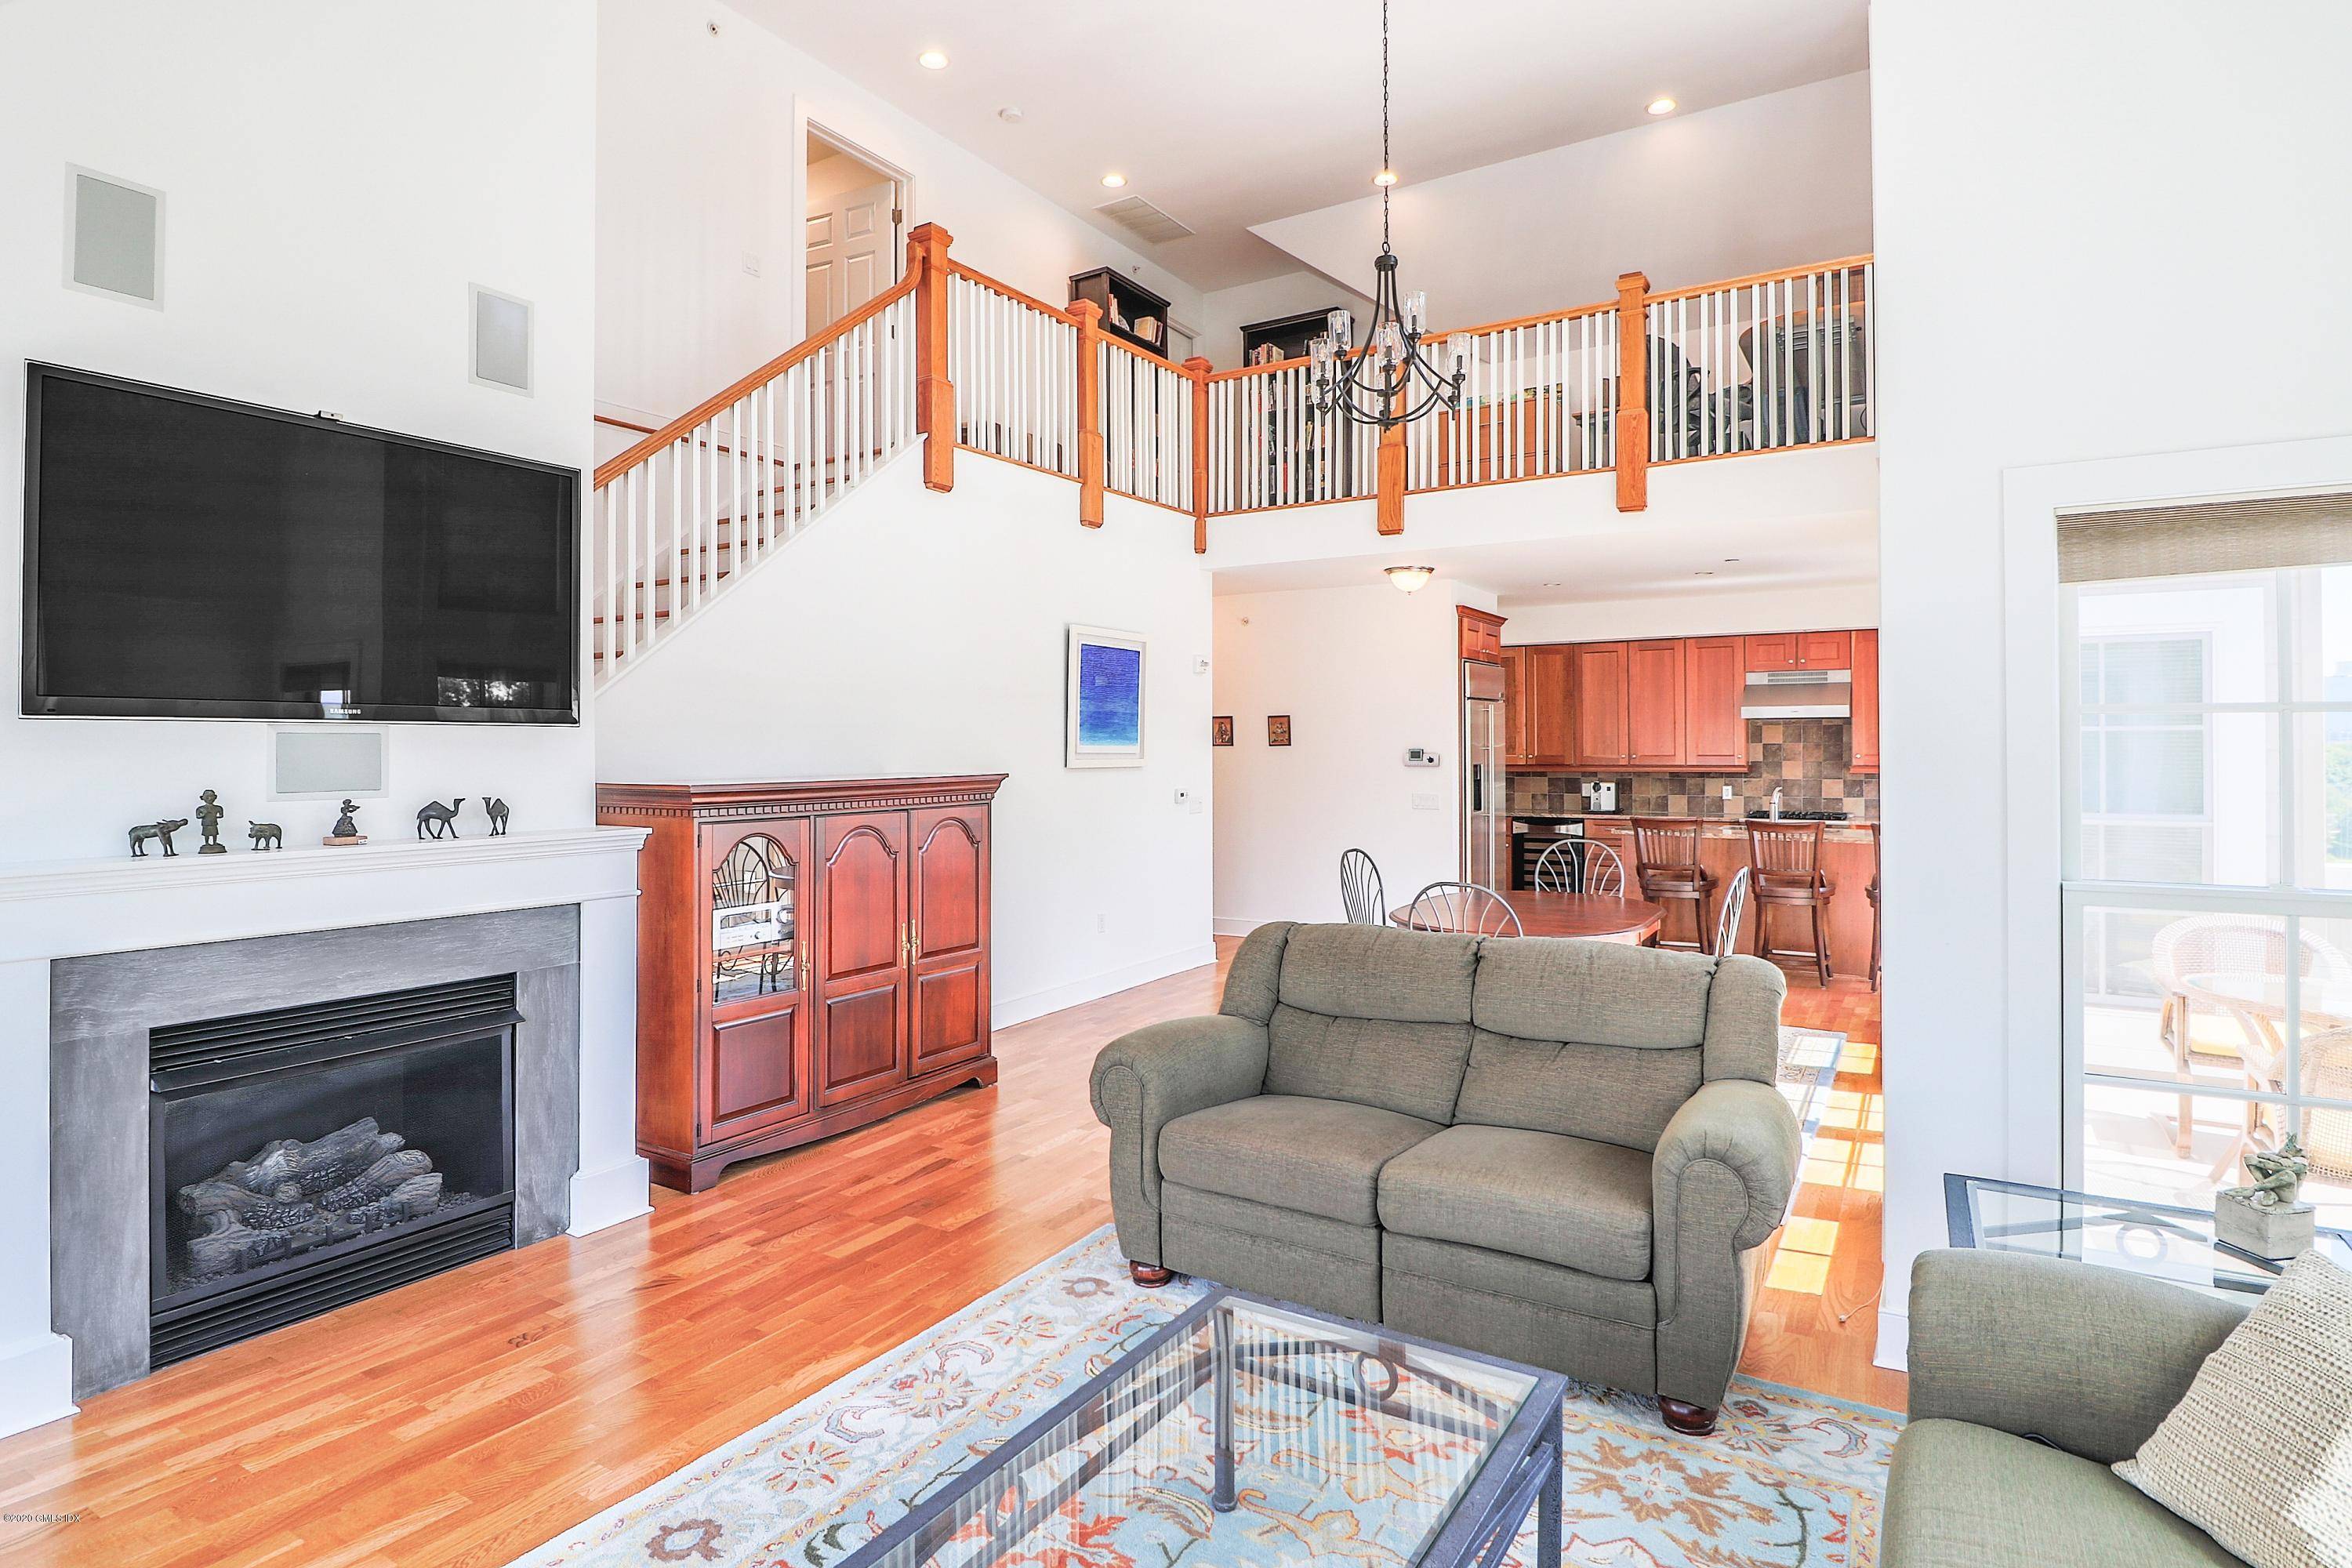 This impressive two bedroom penthouse corner unit in the gated award winning Palmer Hill complex is the perfect place to have the benefits of a house, yet enjoy the amenities ...